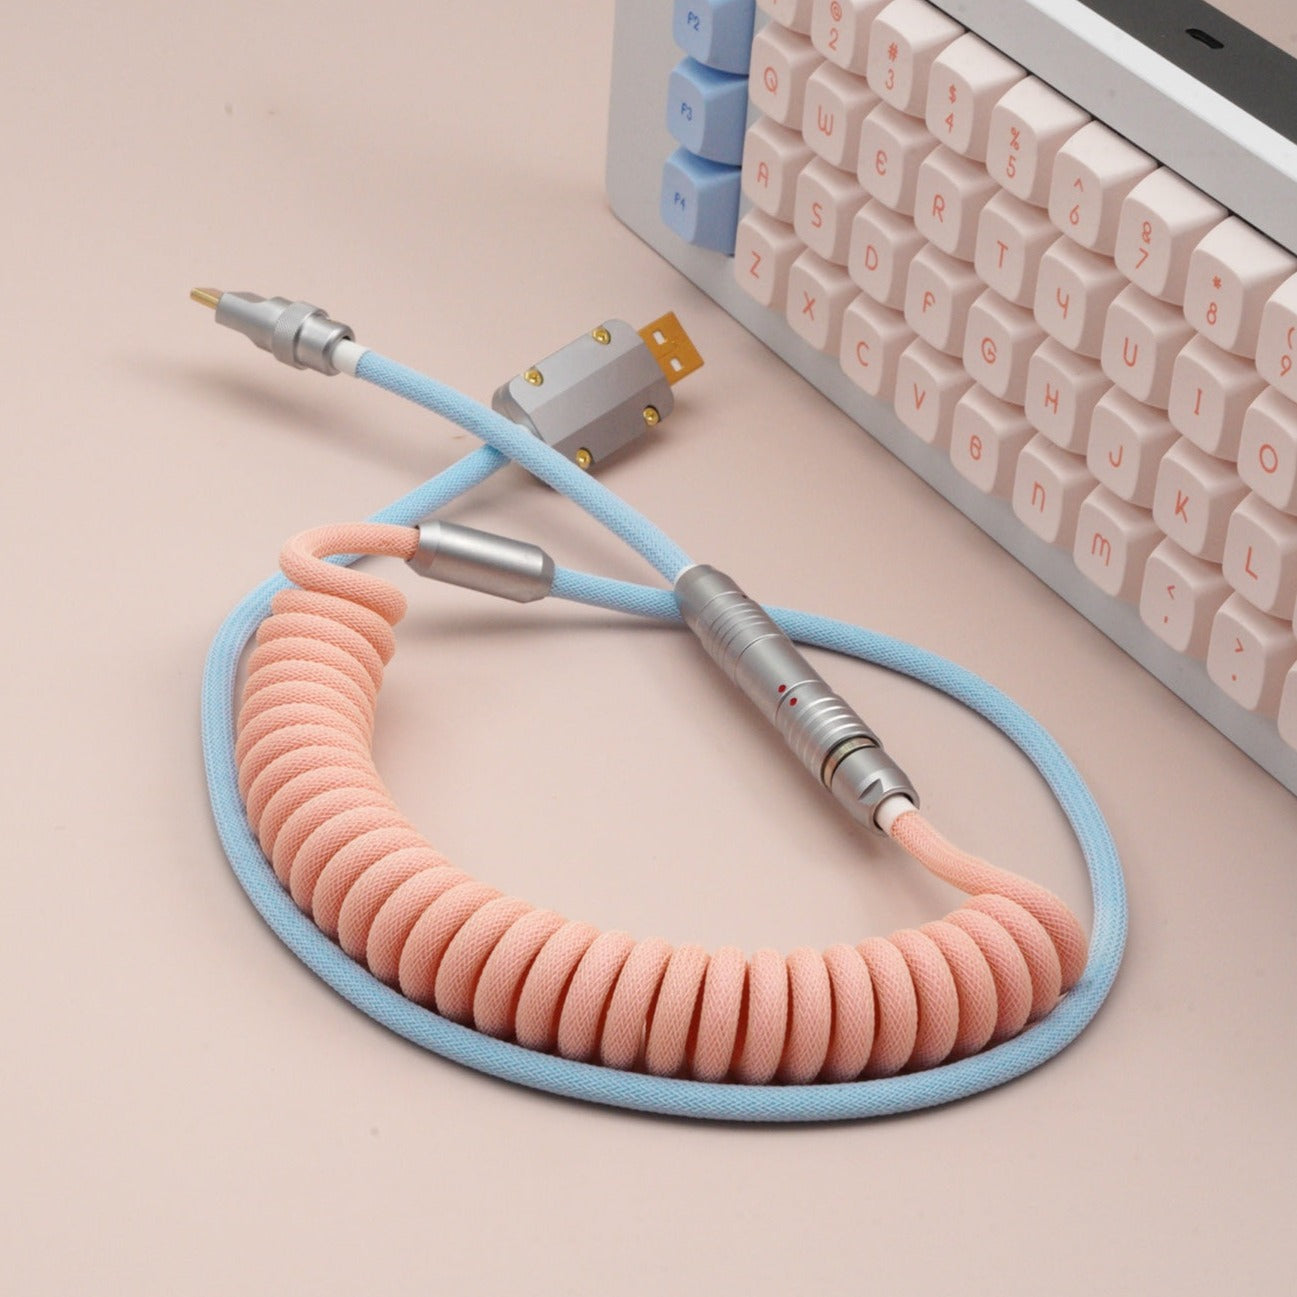 Sleeved Coiled Keyboard Aviator Cable, Lemo Style Connector - Peach/Light Blue